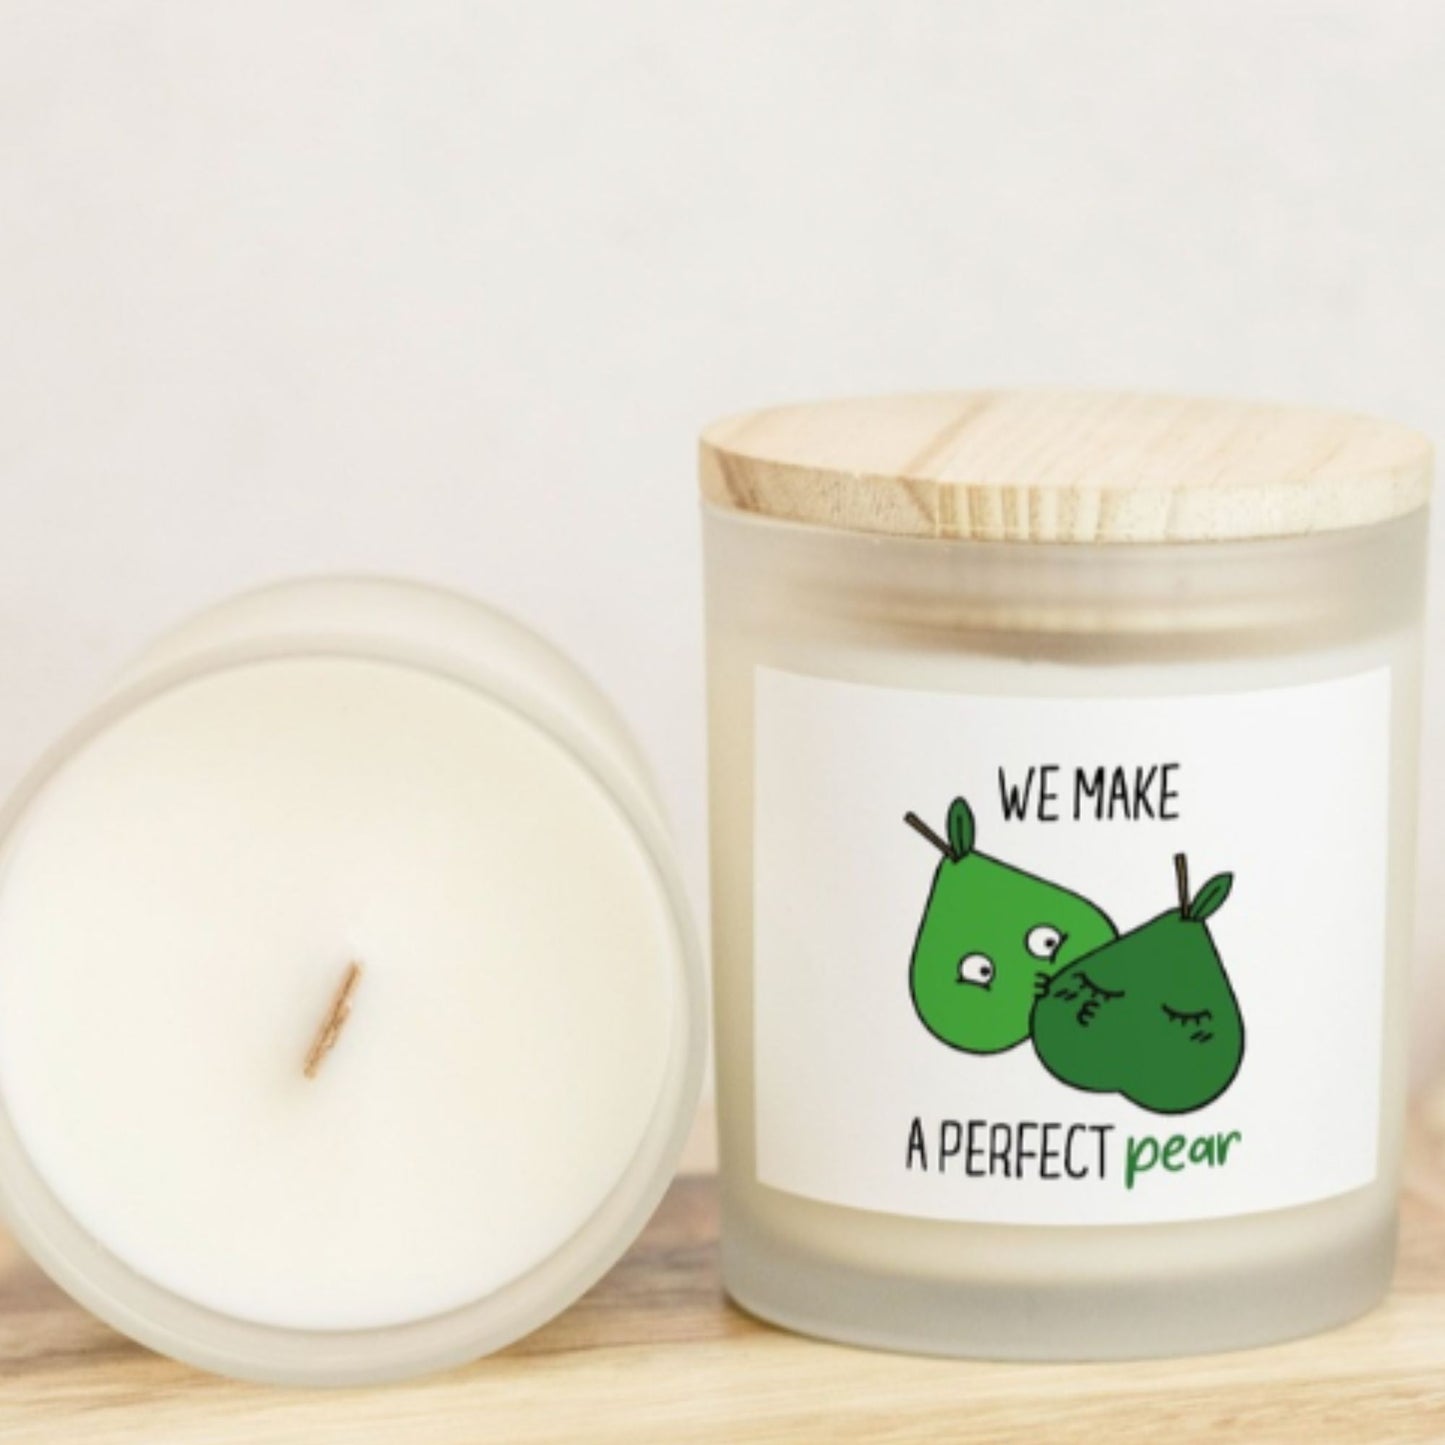 We Make A Perfect Pear Candle Premium Non-Toxic Wood Wick Candle Frosted Glass (Hand Poured 11 oz)